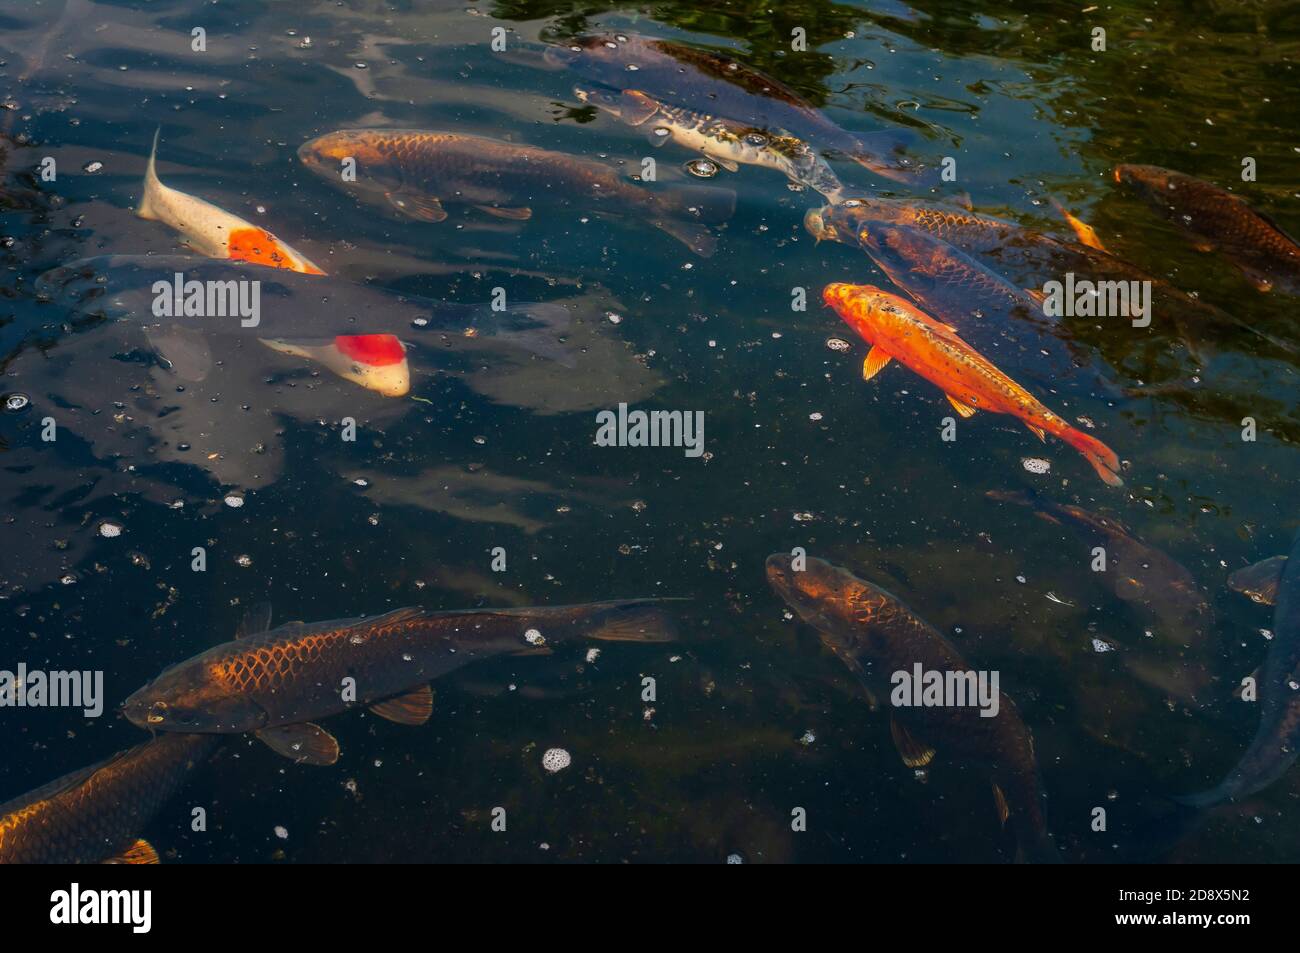 Brightly coloured Goldfish and other exotic fish swimming and shoaling in water, creating complex patterns, ripples, reflections and refractions. Stock Photo